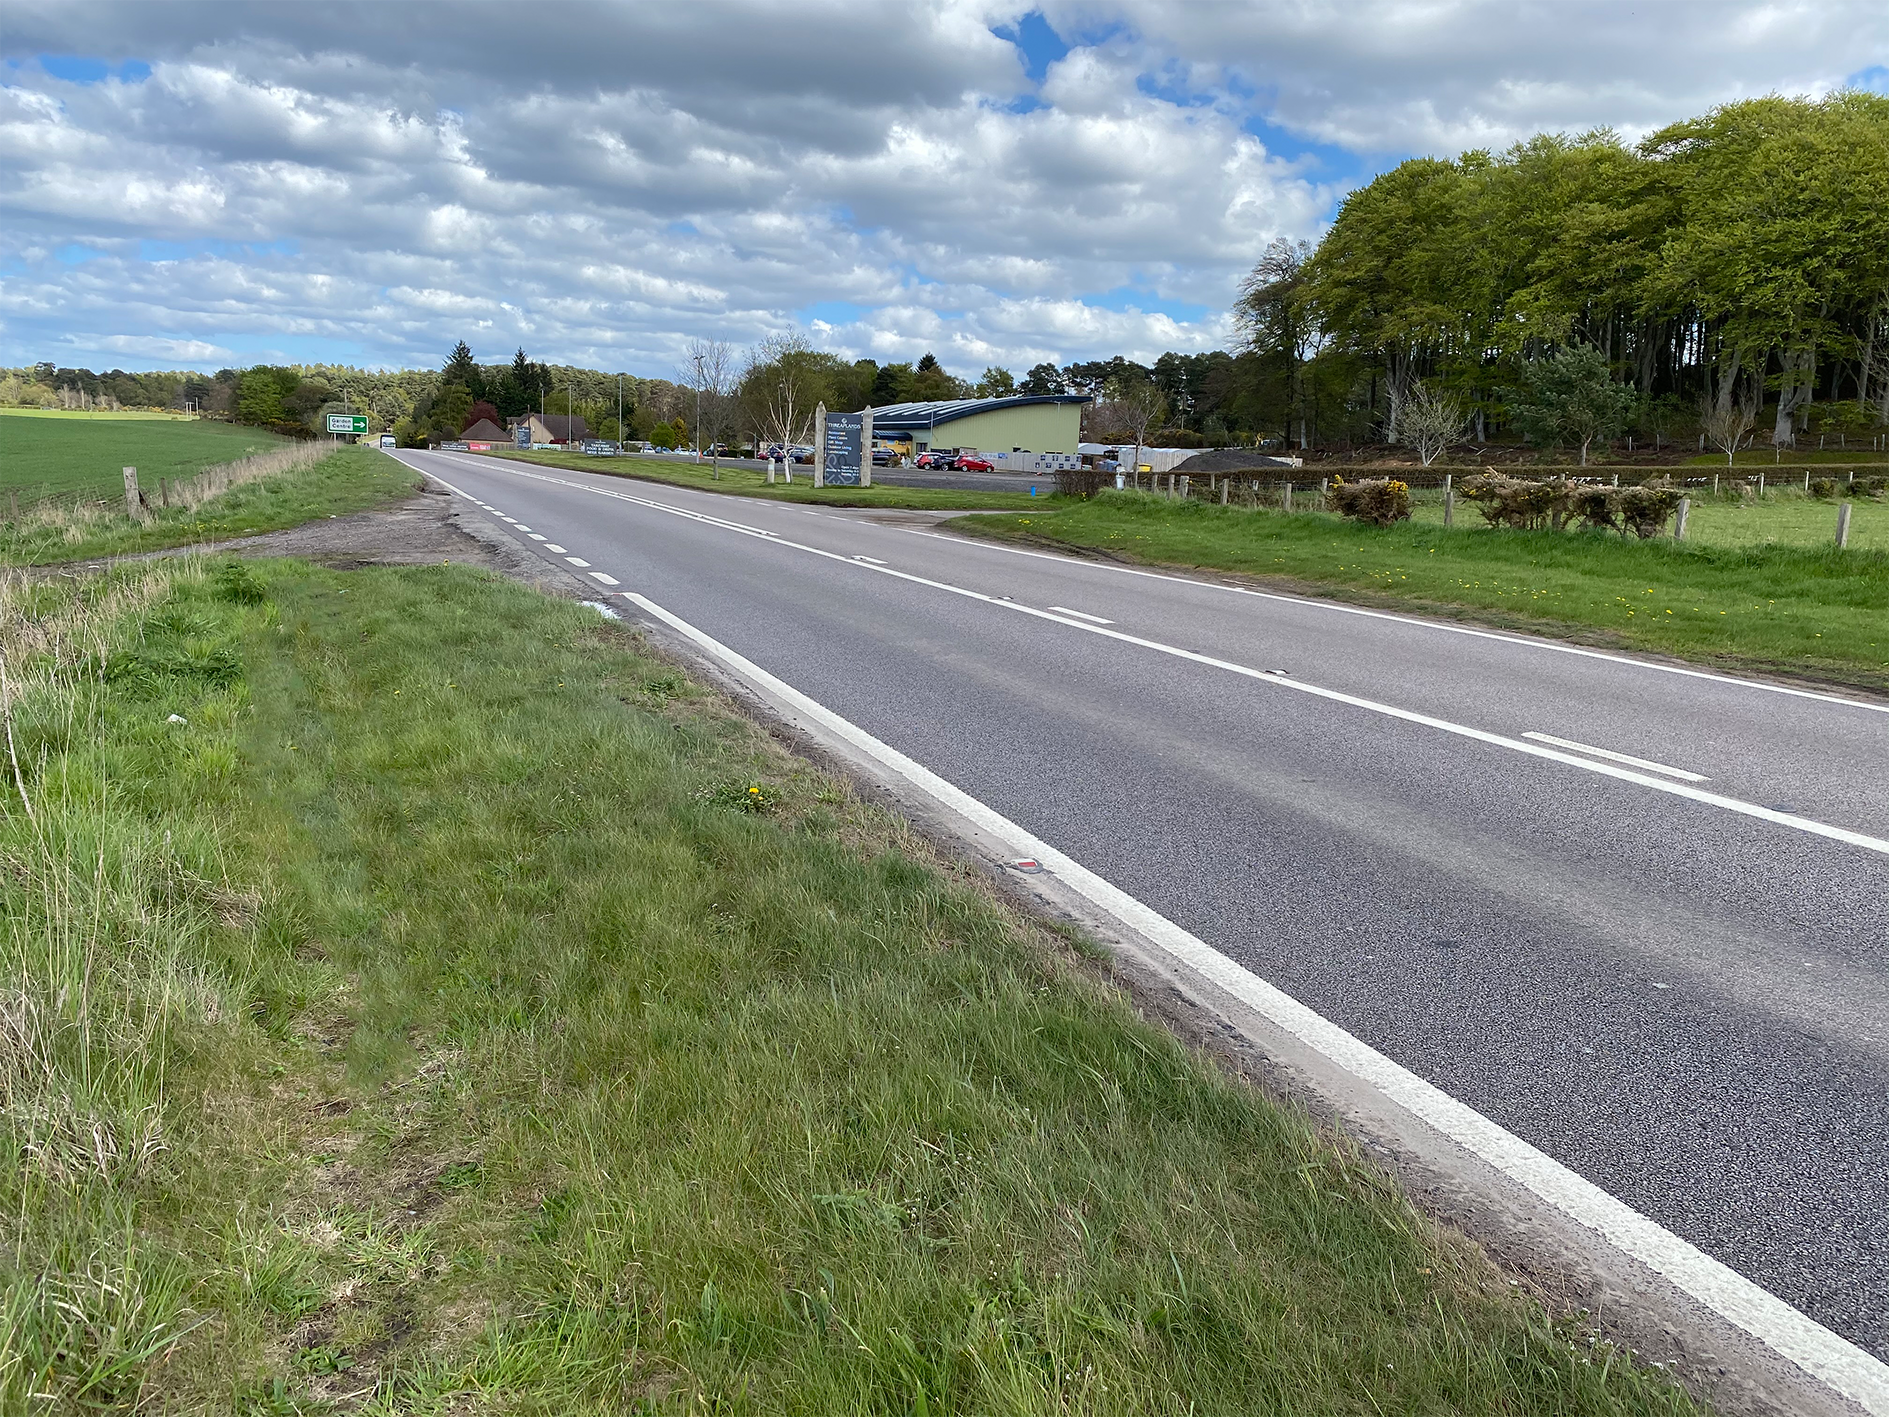 CONSTRUCTION OF A NEW SECTION OF FOOTWAY AND CYCLEWAY ON THE A96 NEAR LHANBRYDE TO GET UNDERWAY   